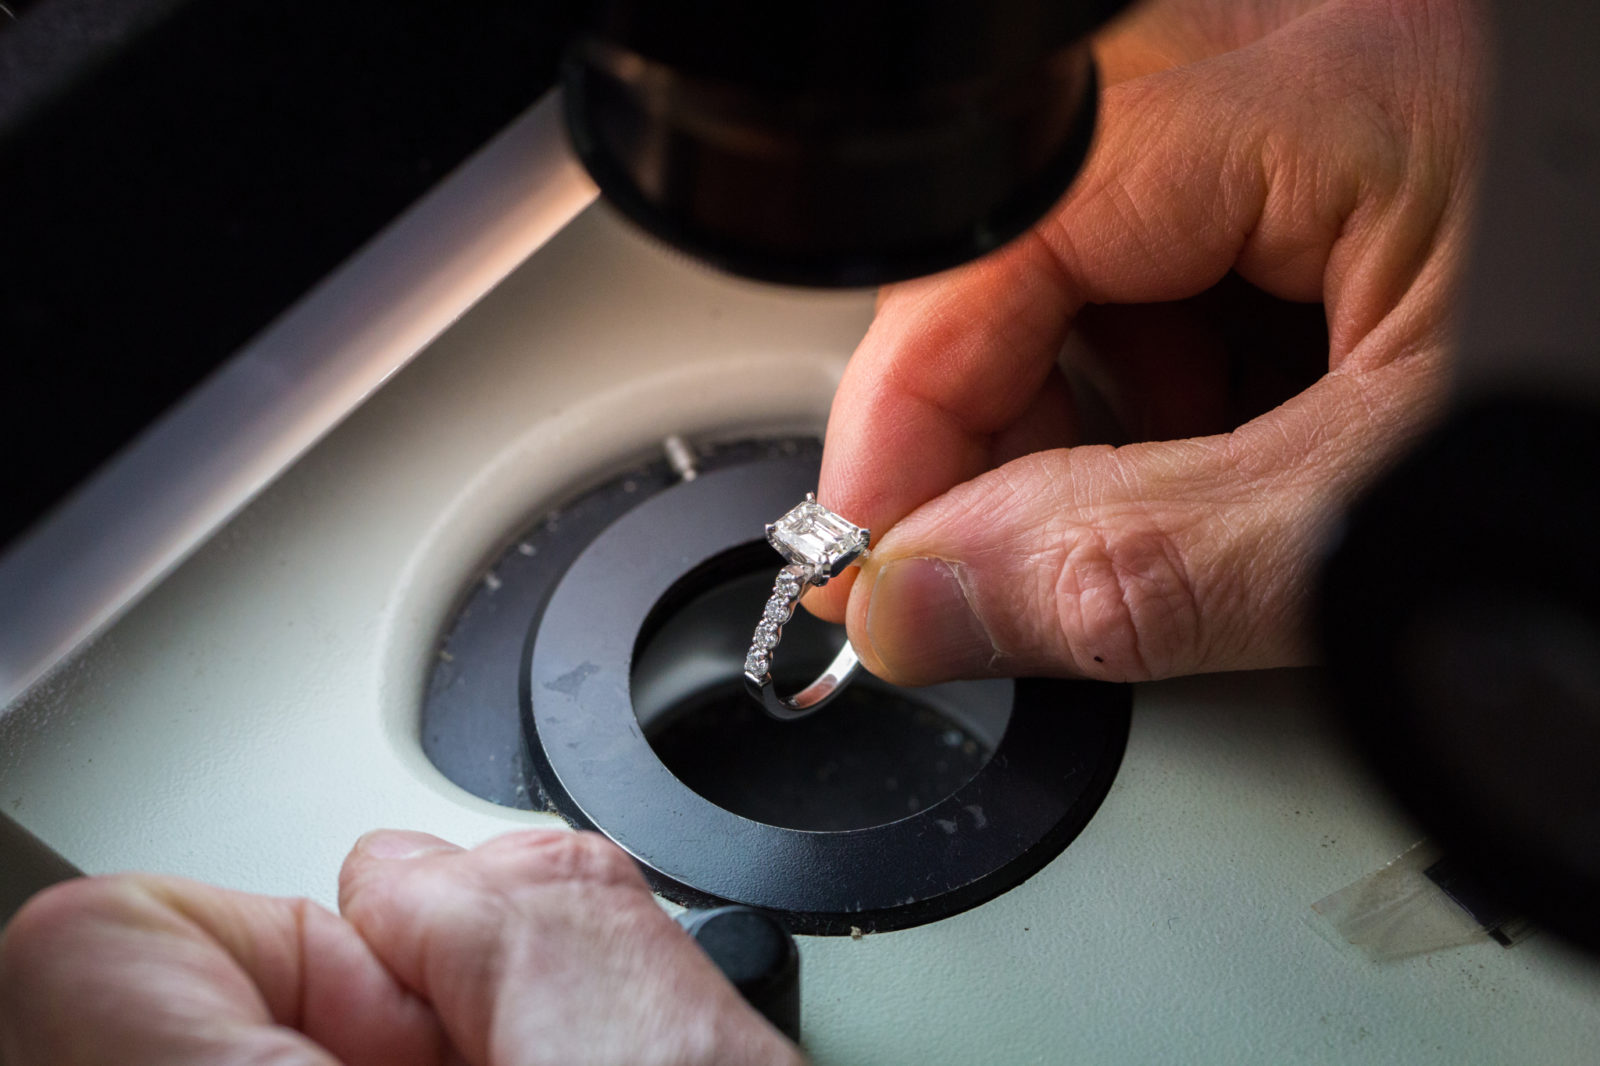 Custom Engagement Rings and Wedding Bands at Gem Source in Lexington, Kentucky.